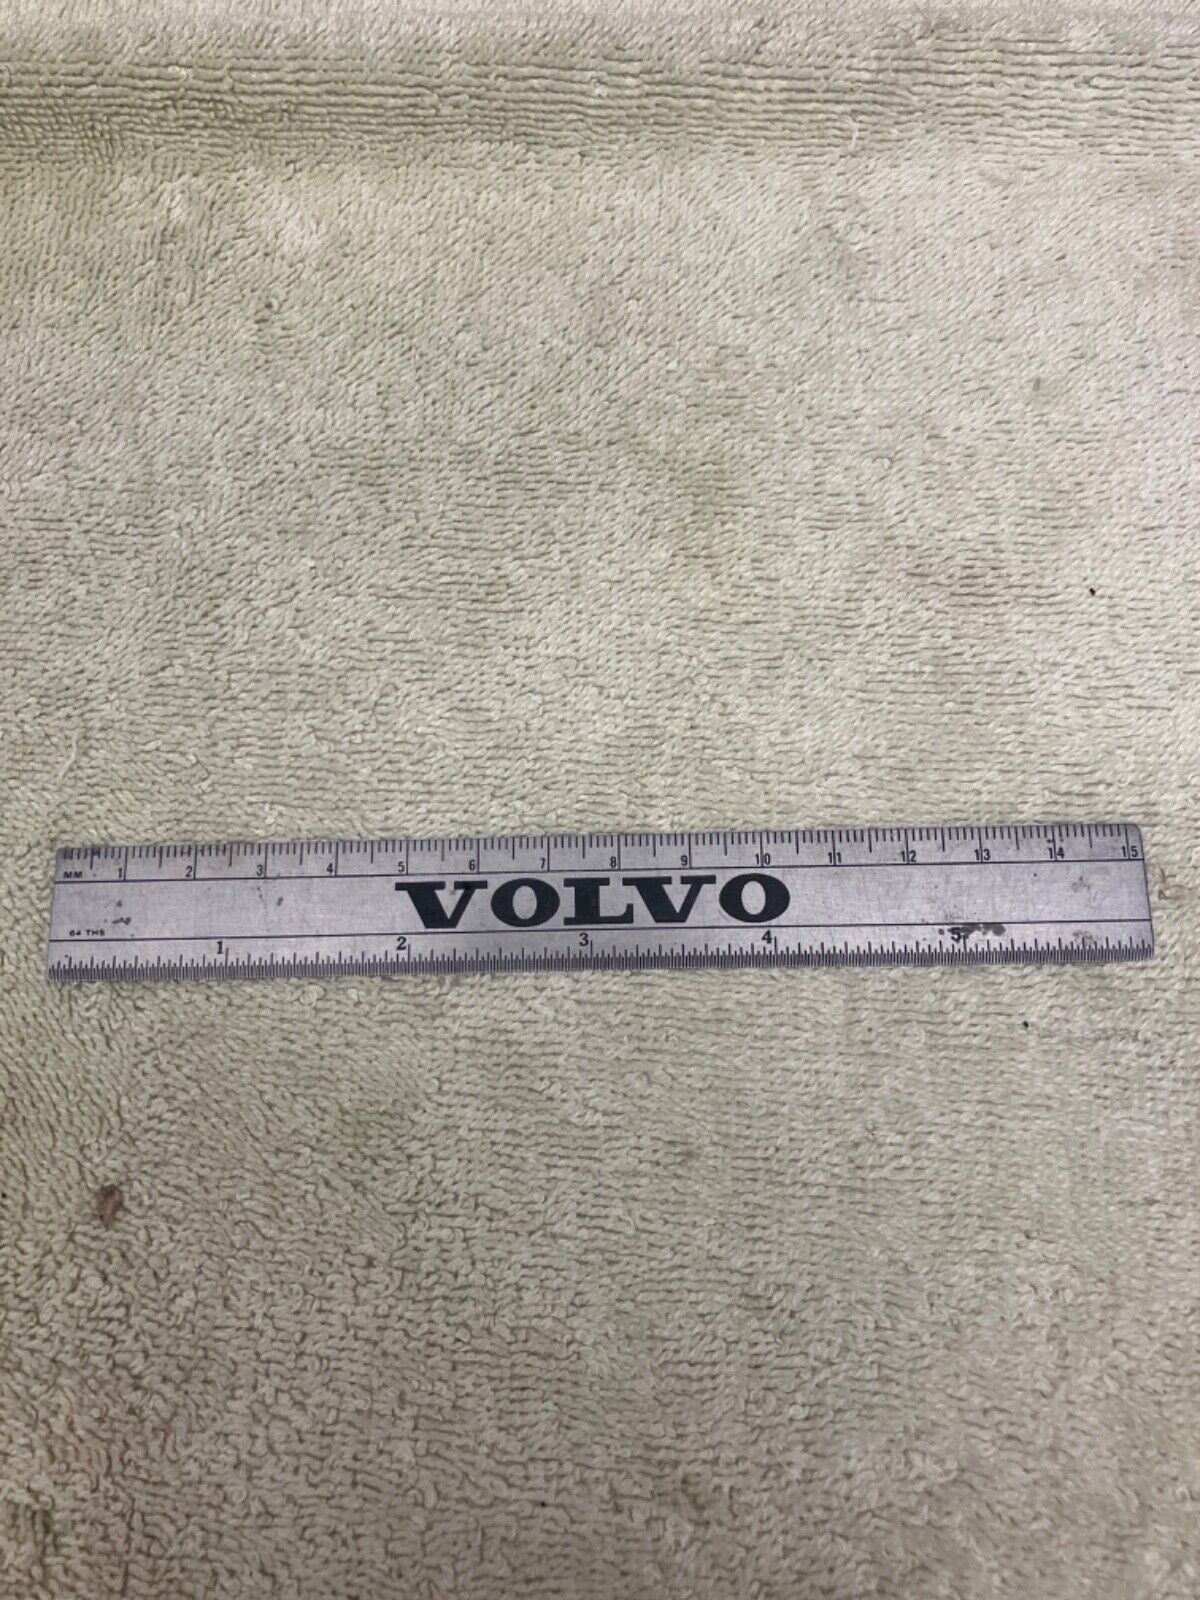 vintage volvo automotive stainless 6 inch ruler scale